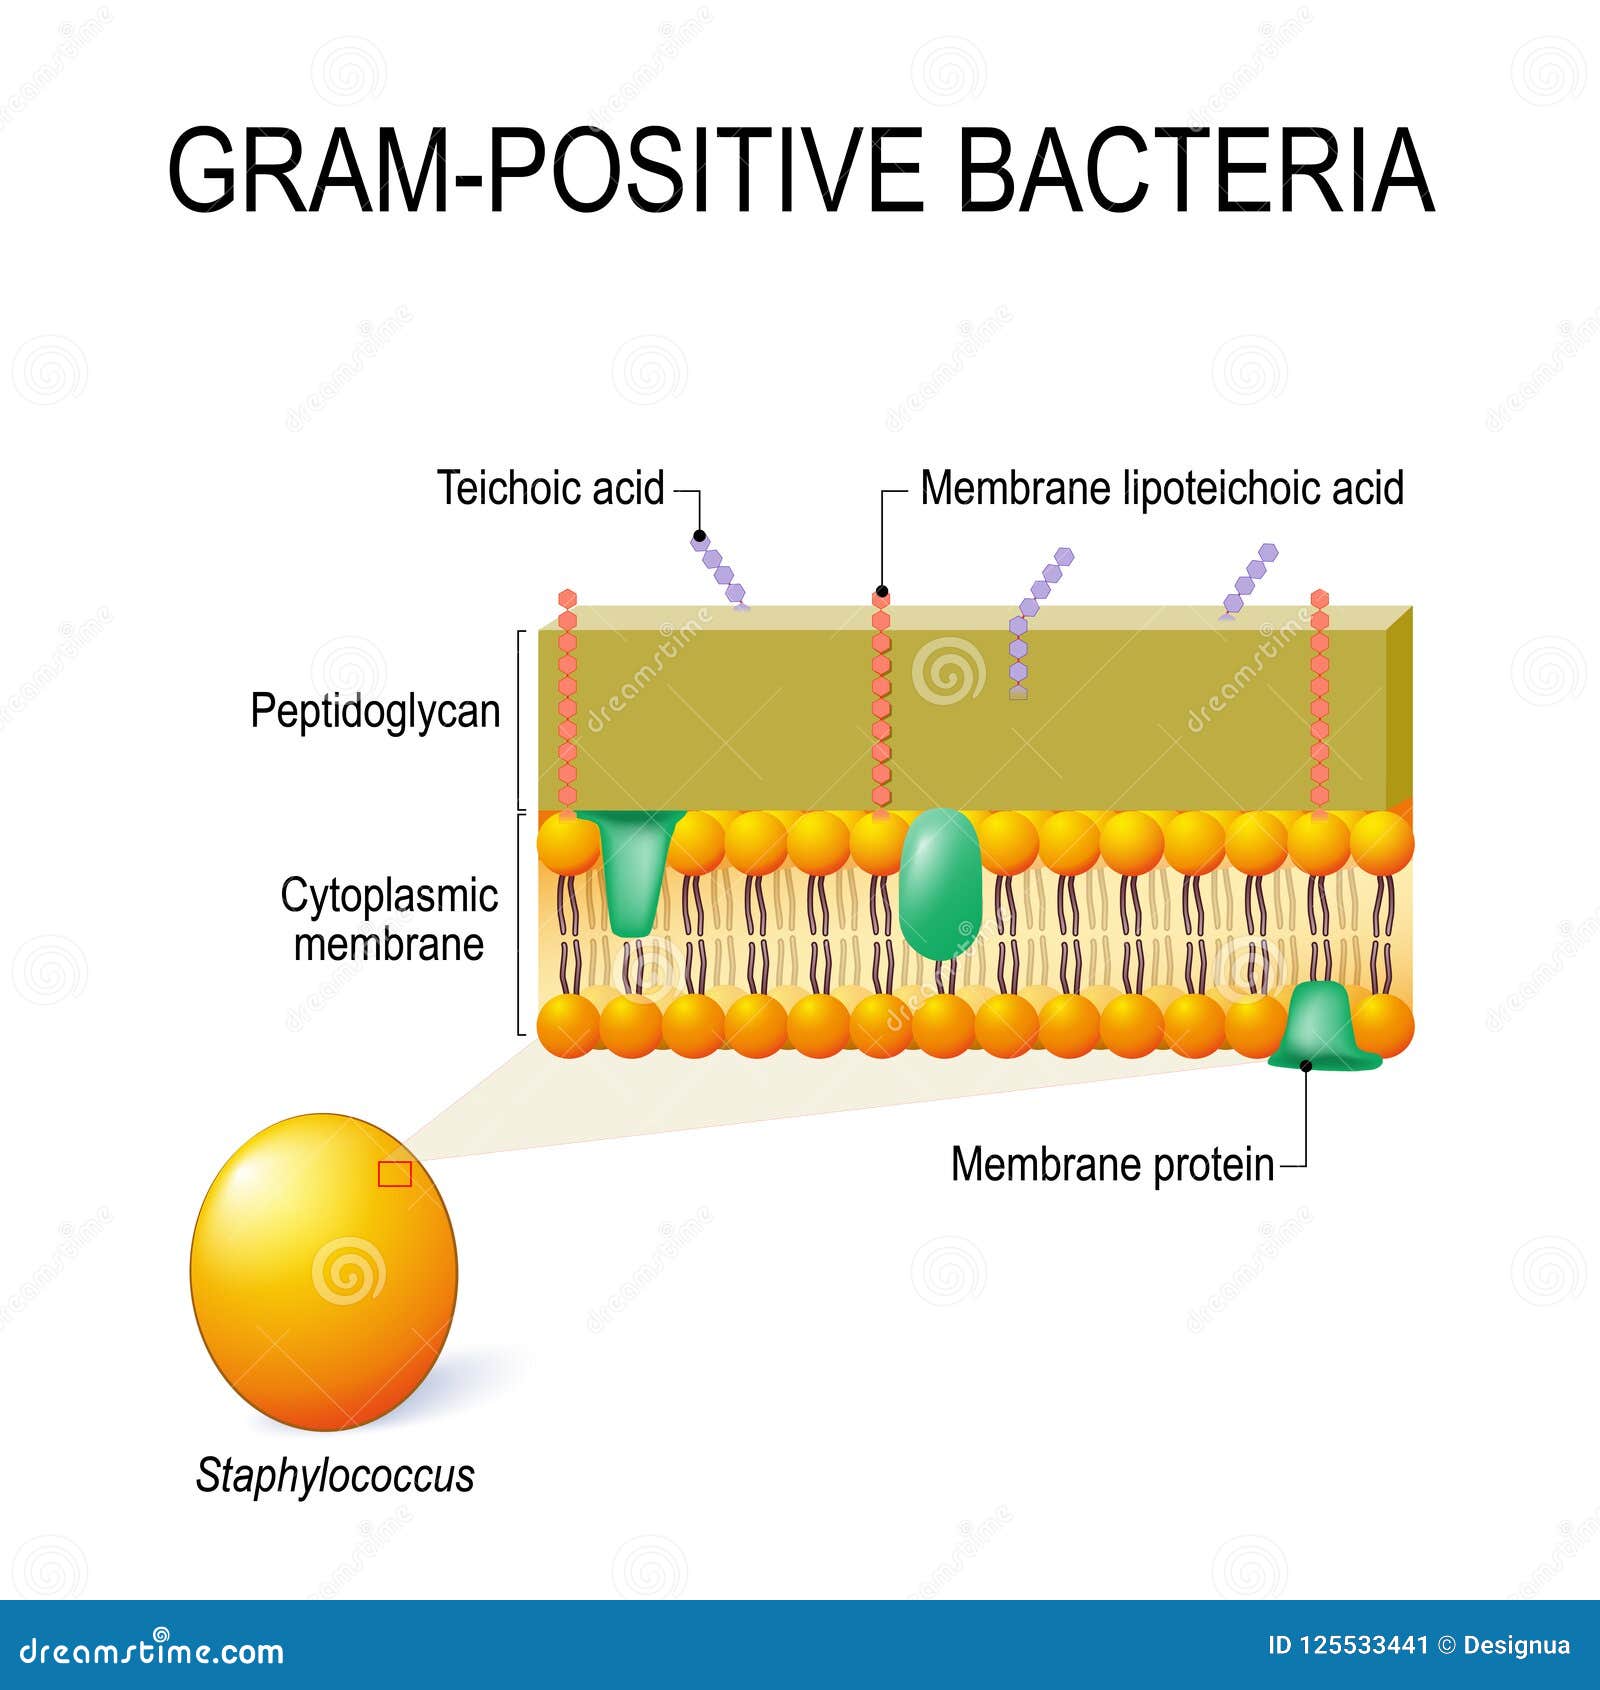 cell wall structure of gram-positive bacteria for example staphylococcus.